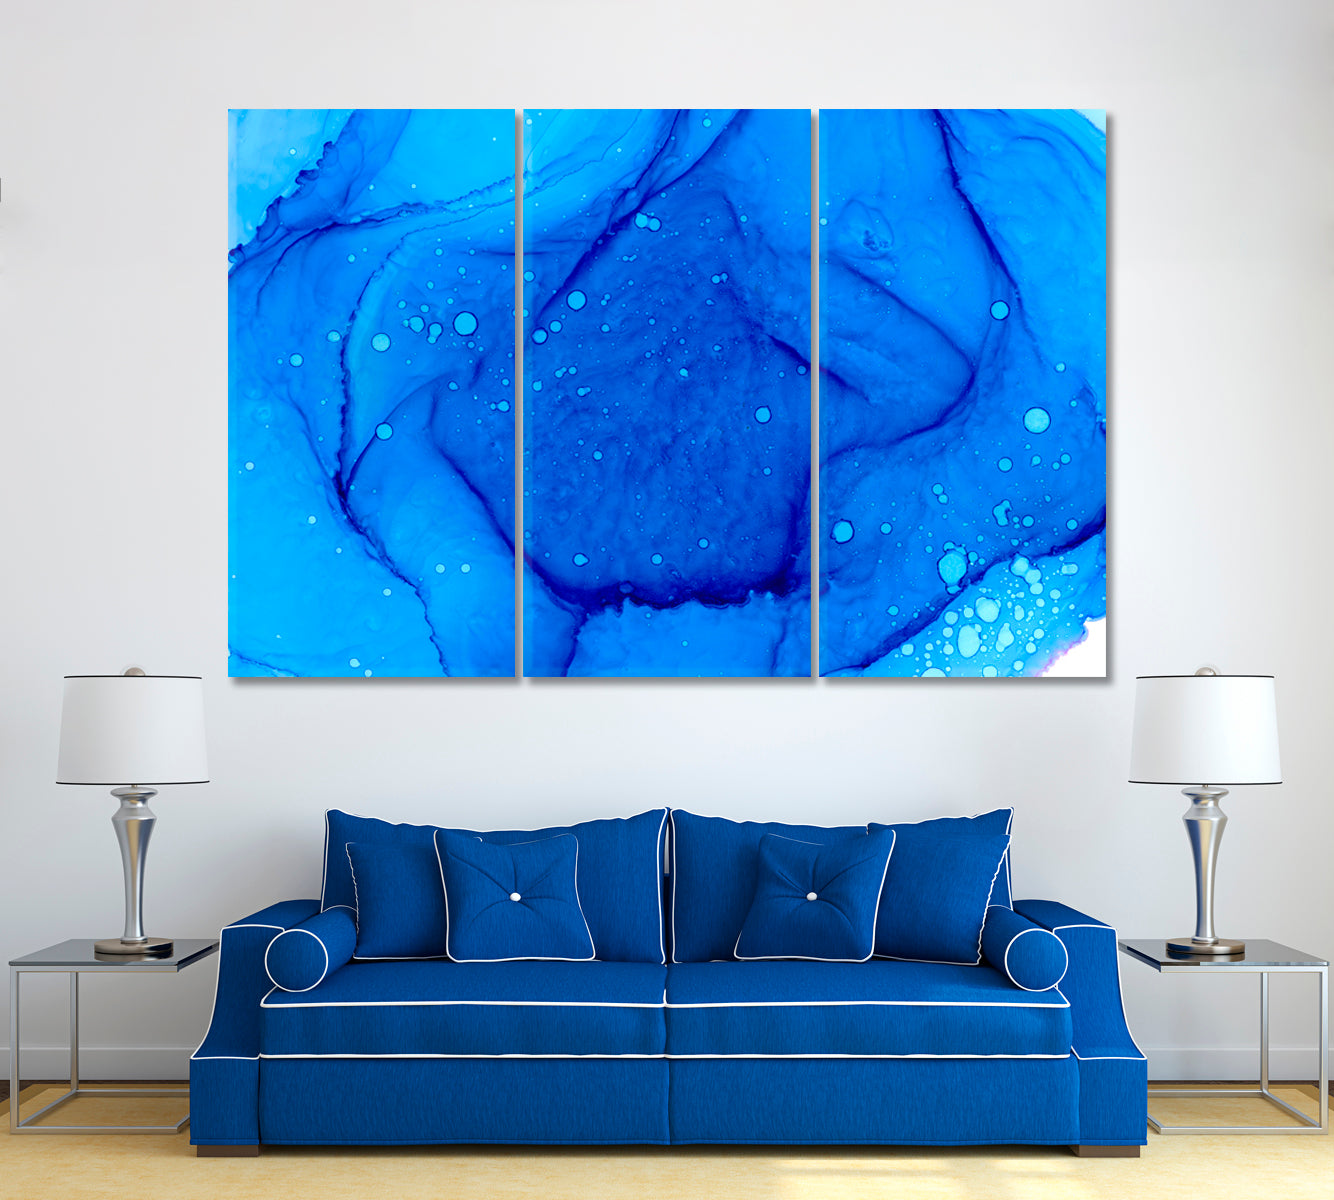 Abstract Blue Watercolor Splashes and Drops Canvas Print ArtLexy 3 Panels 36"x24" inches 